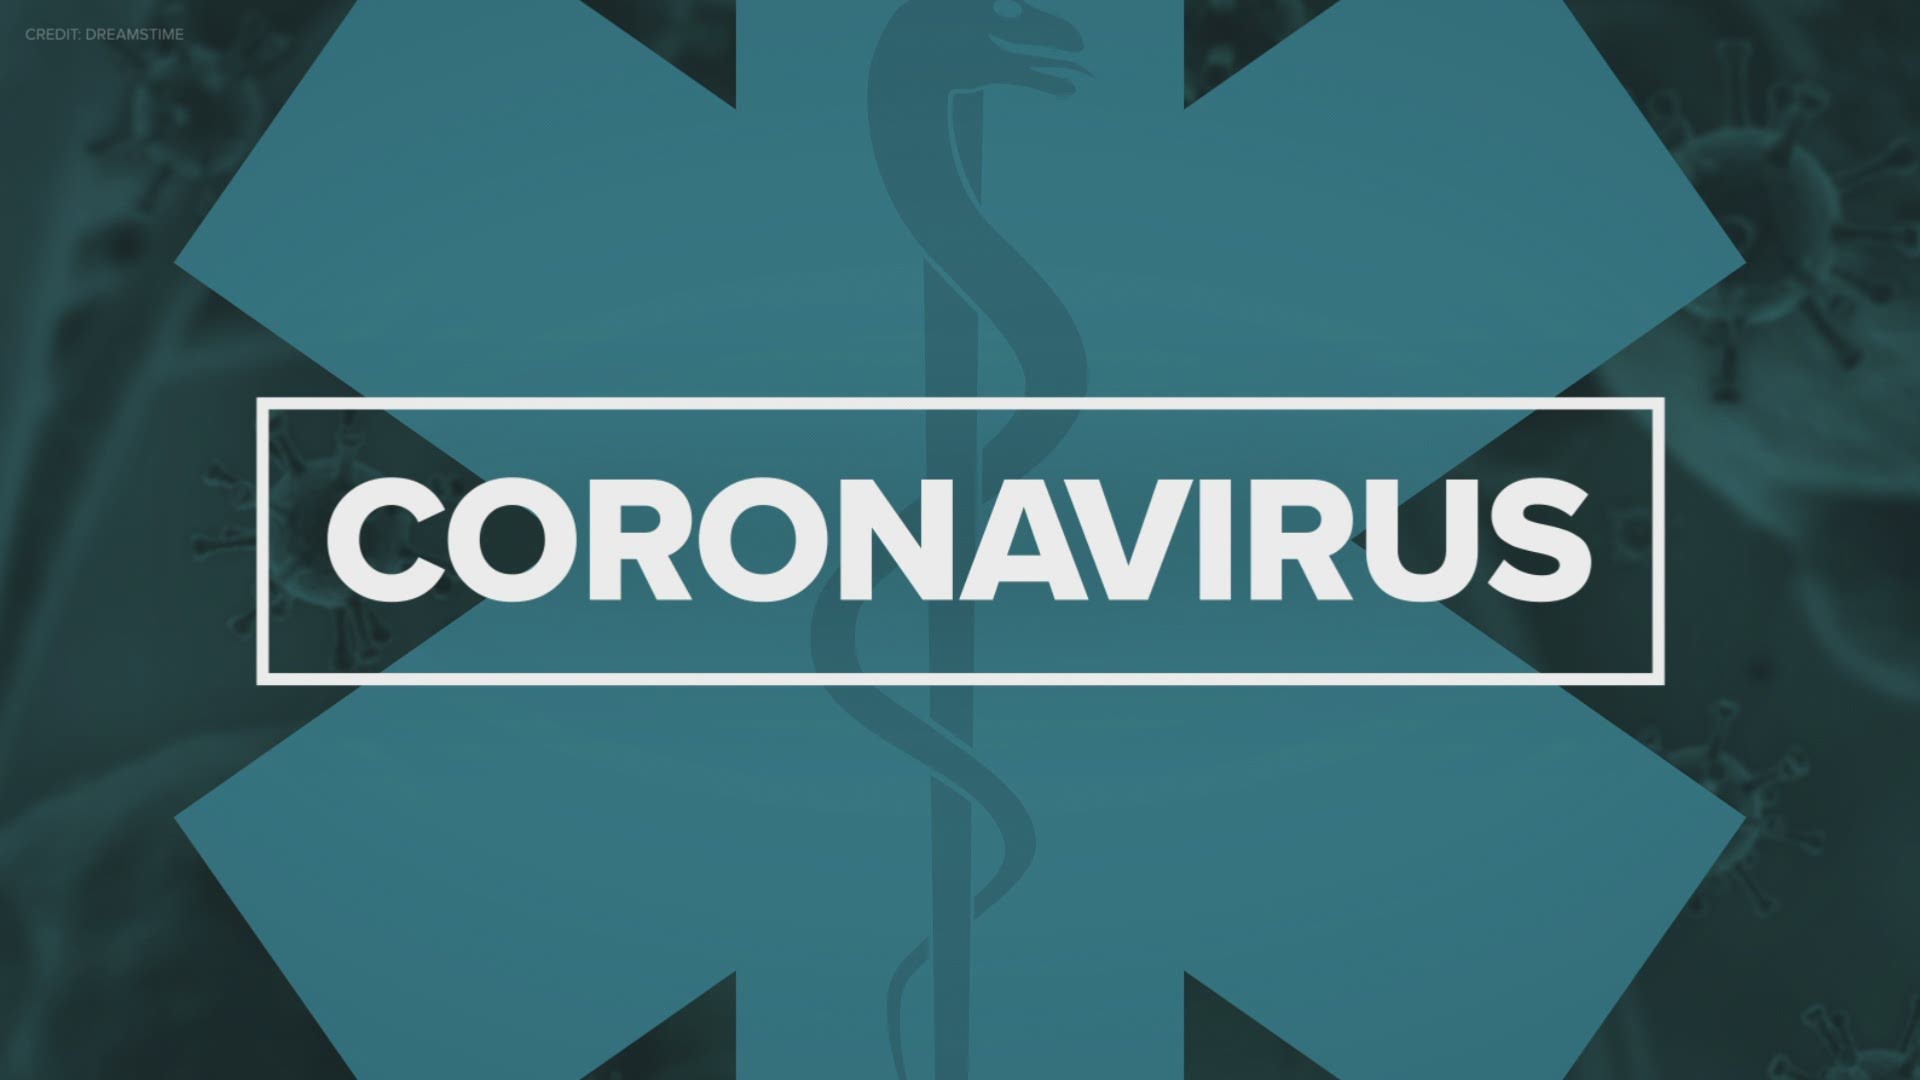 Indiana coronavirus updates: Marion County mask mandate begins Thursday, why masks are worn, places to get masks, Purdue COVID testing, event at fairgrounds canceled